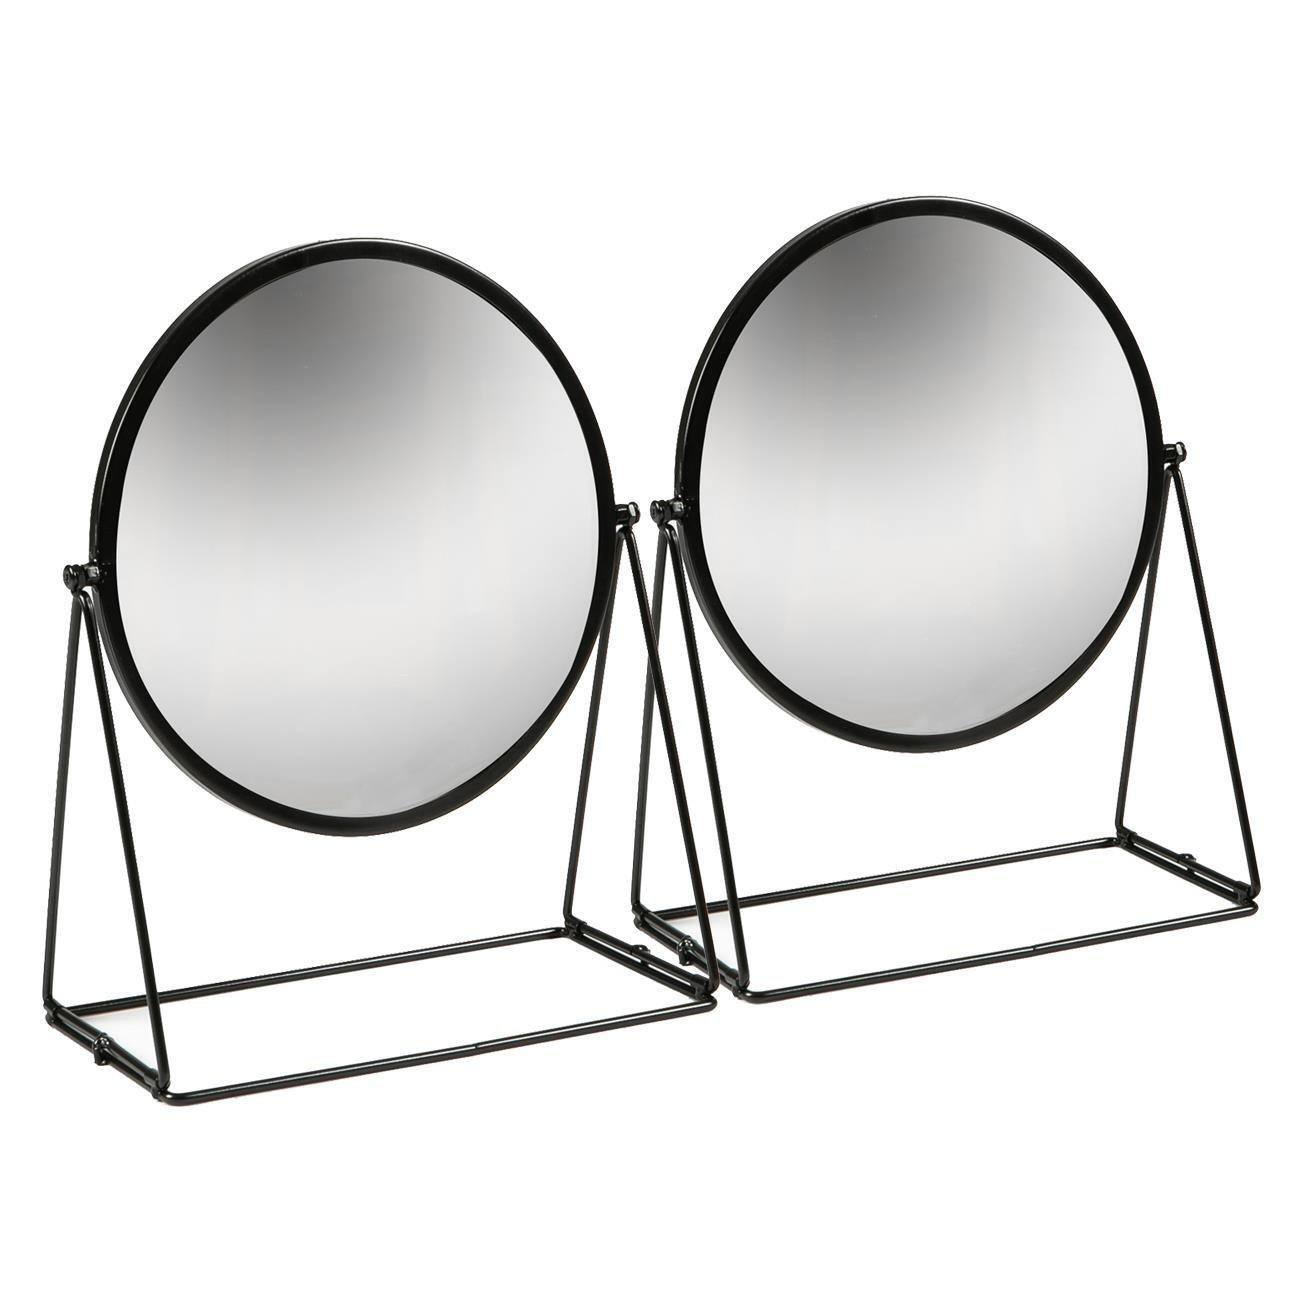 33 x 35cm Round Makeup Mirrors - Black - Pack of 2 - image 1